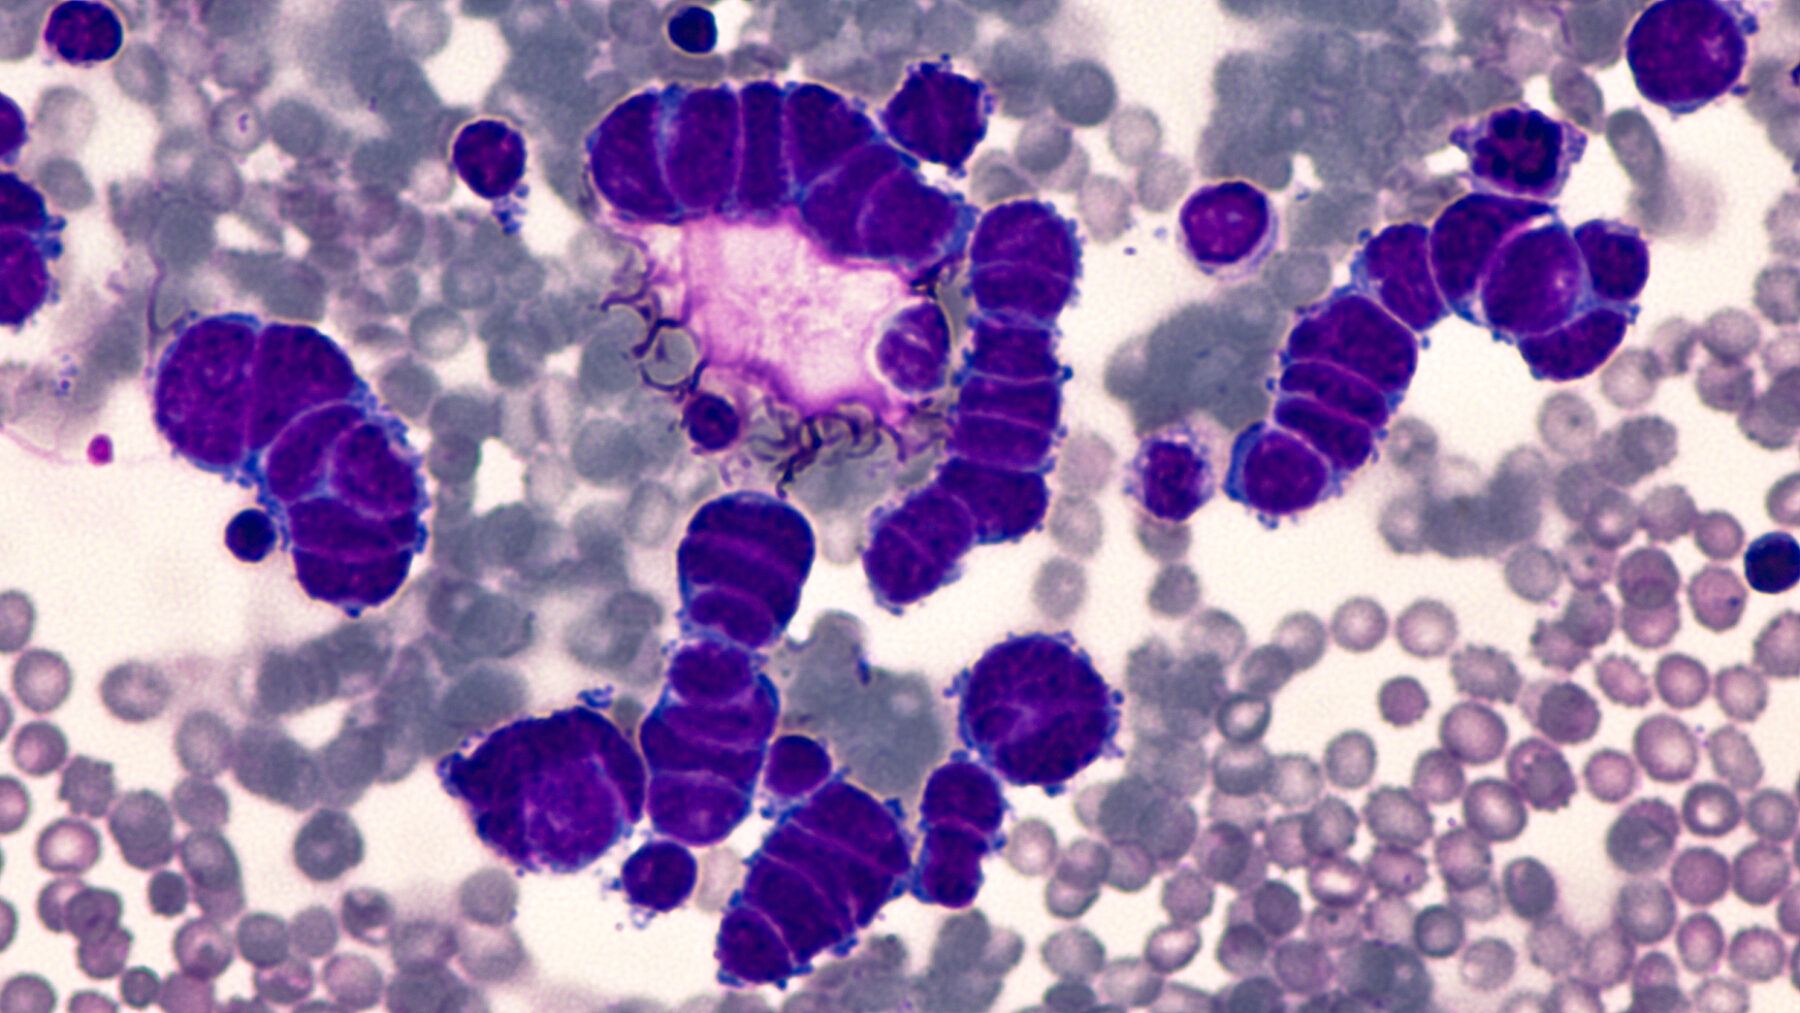 Microscopic images of pleural fluid cytology of a small cell oat cell carcinoma